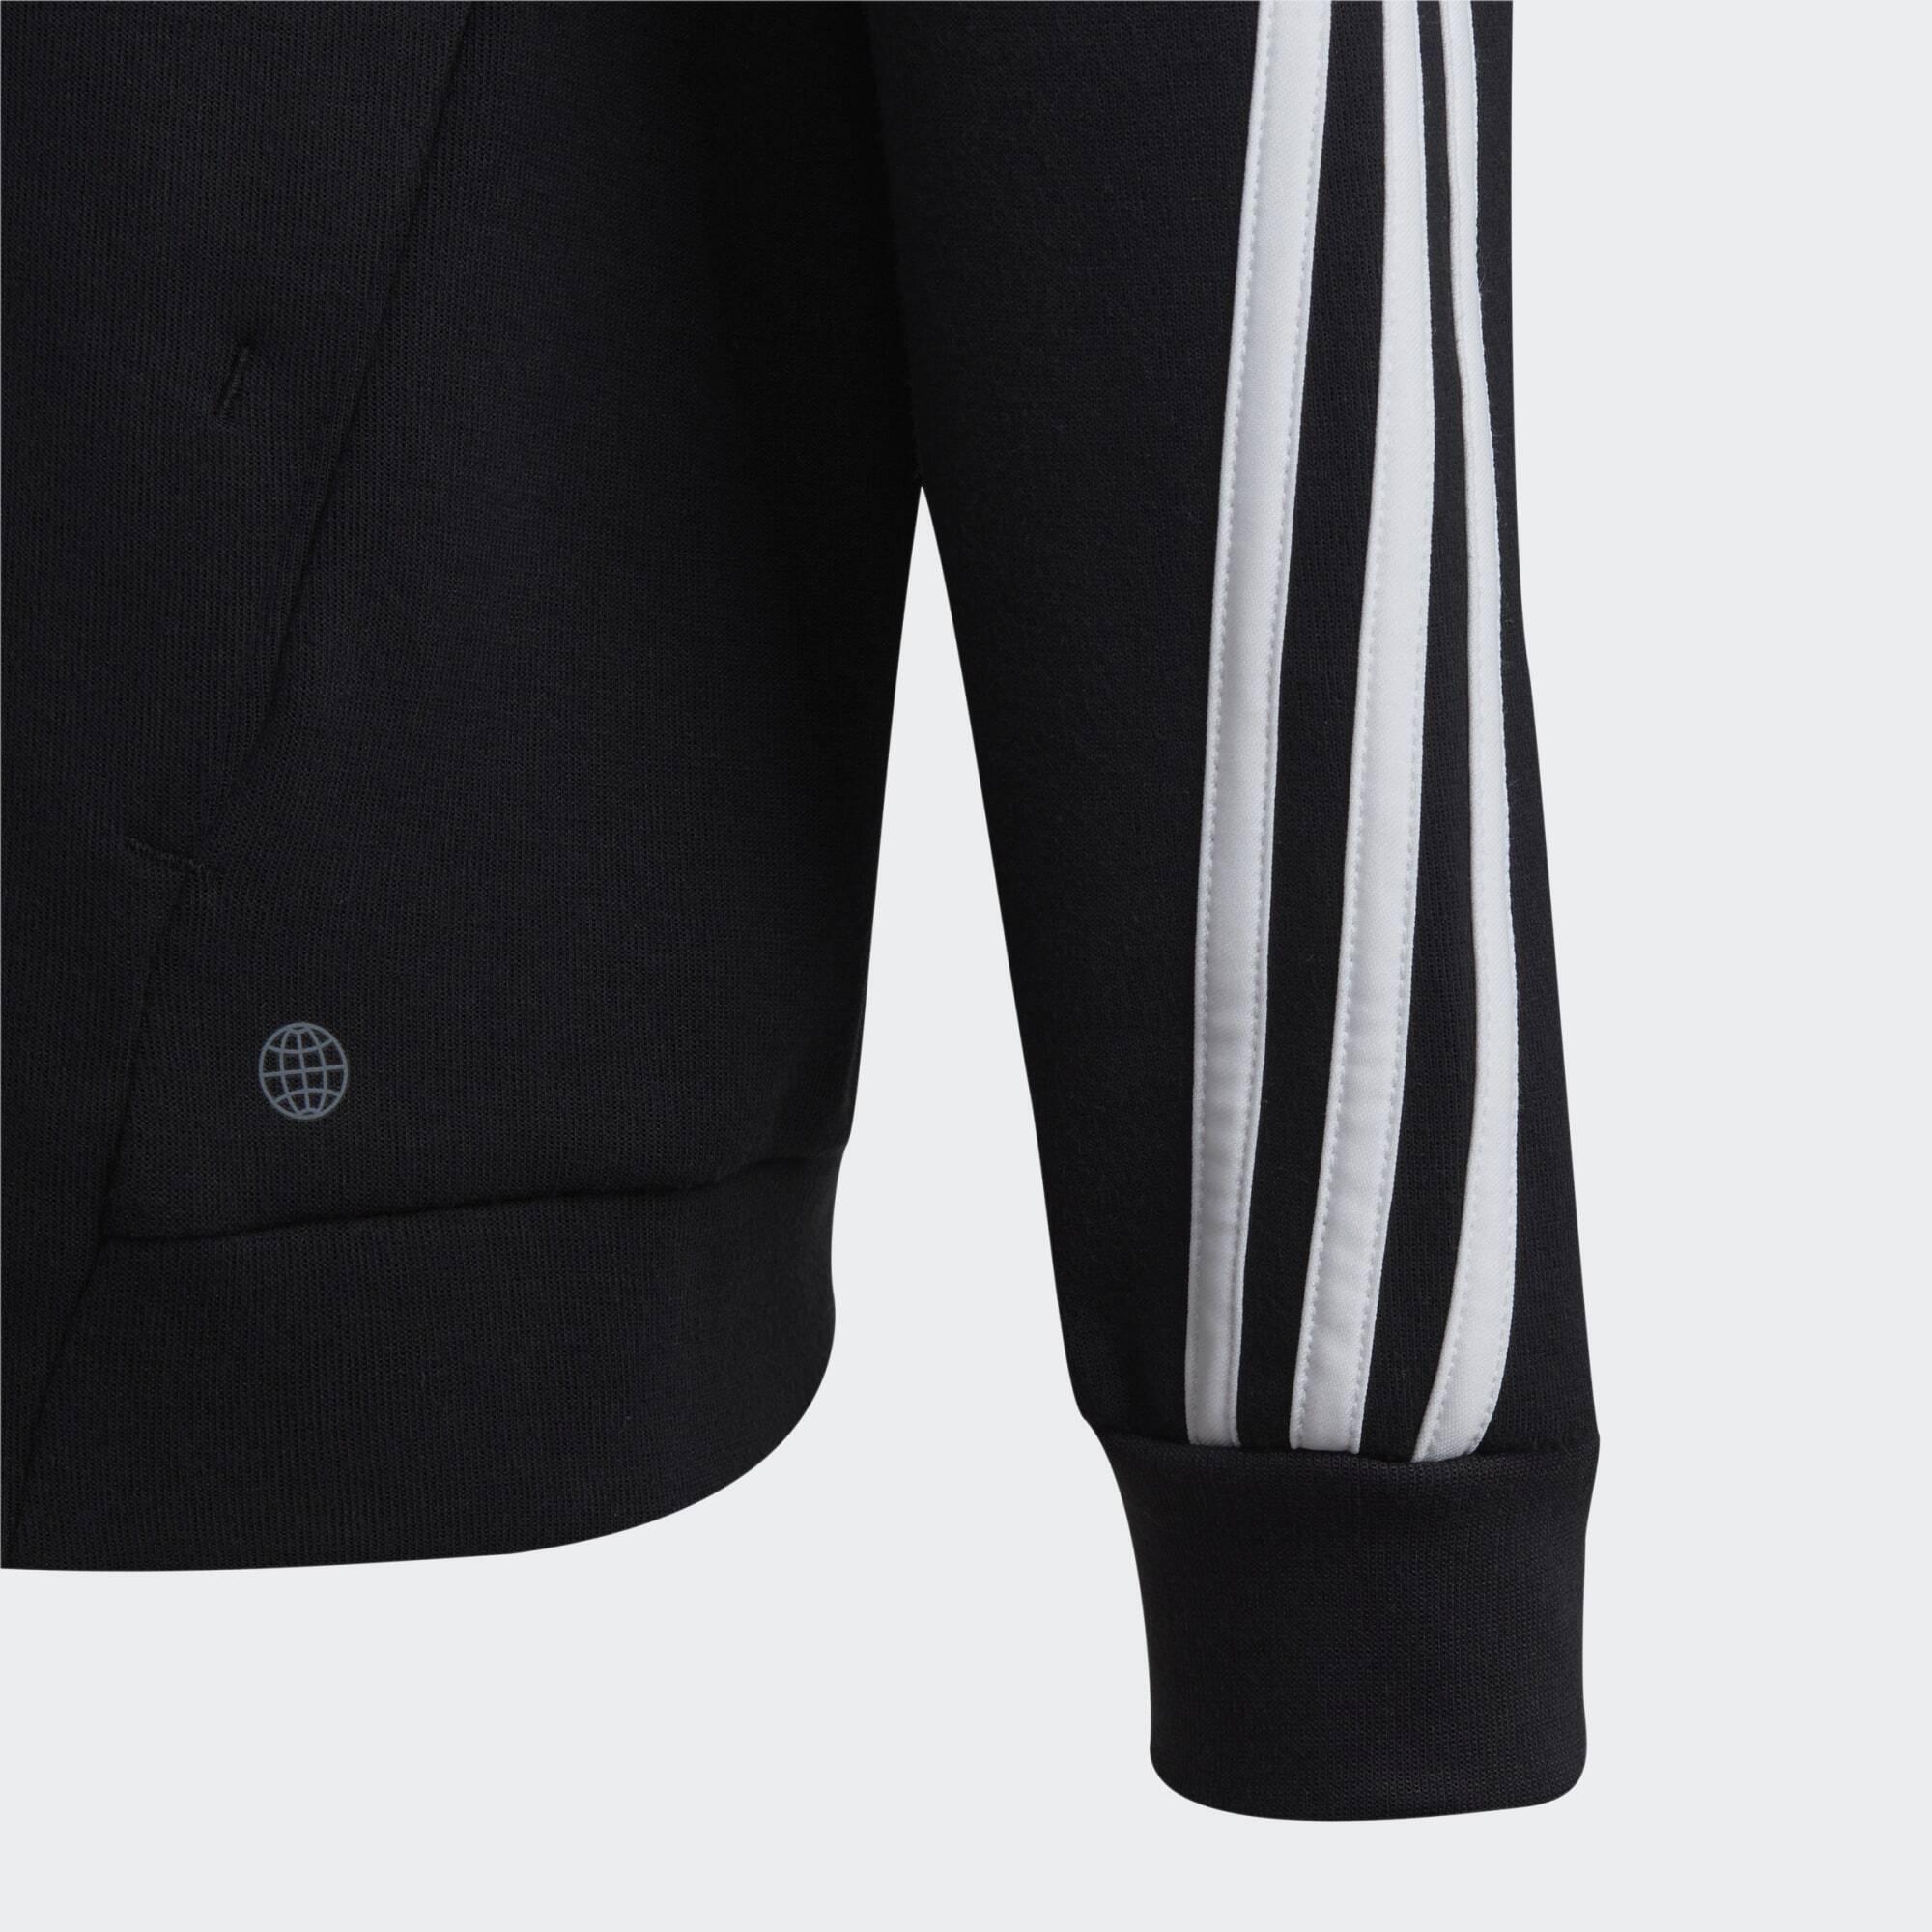 Future Icons 3-Stripes Full-Zip Hooded Track Top 5/7